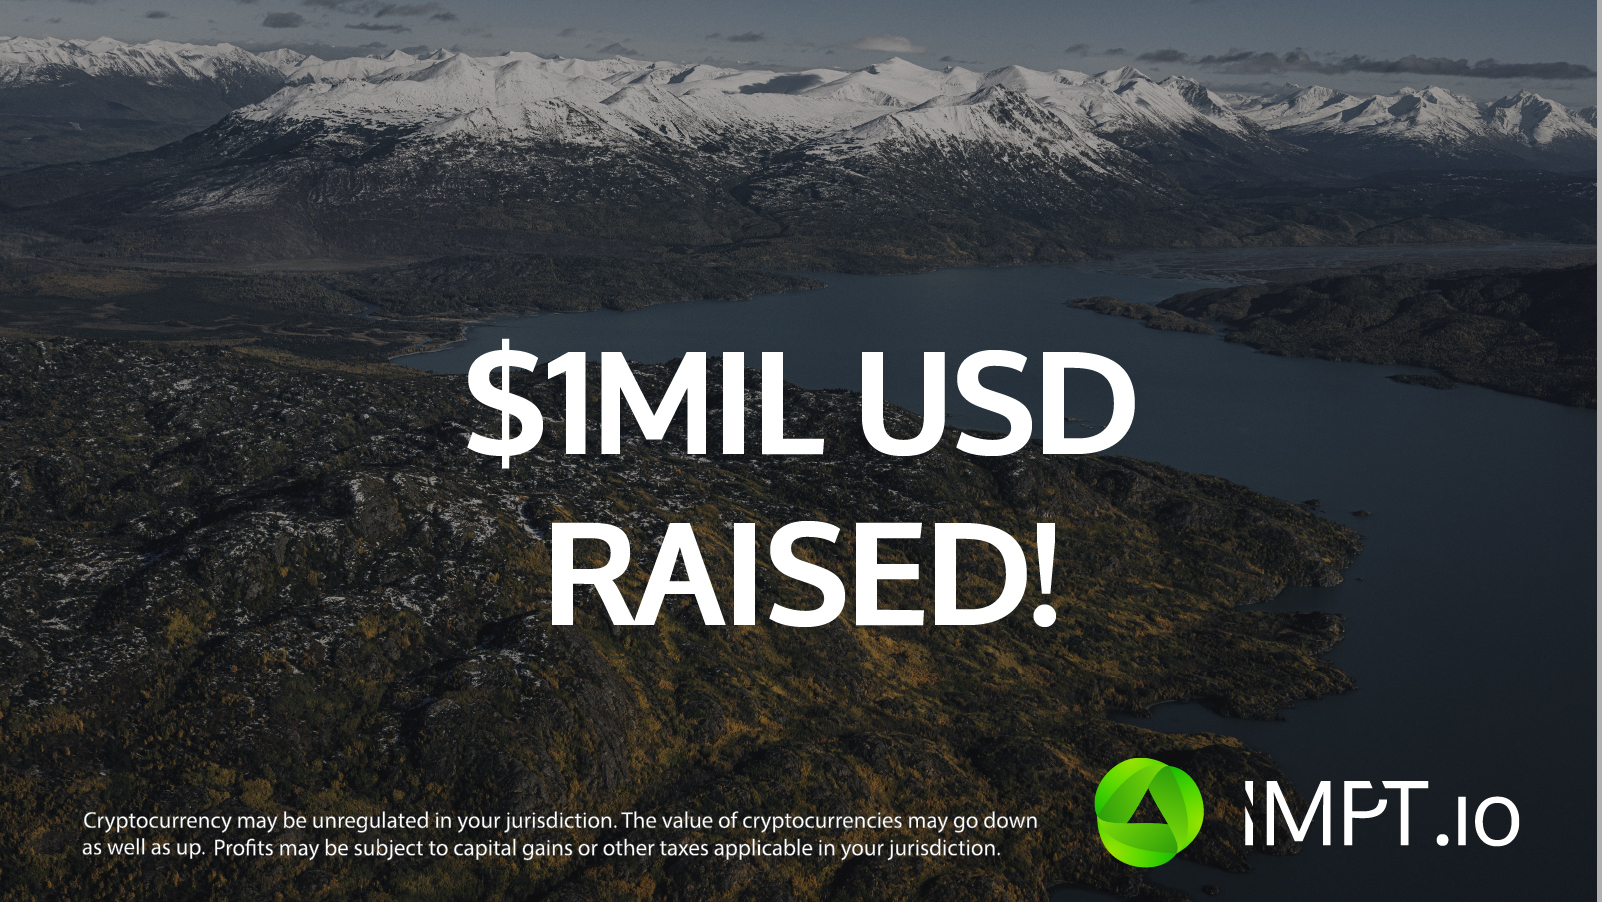 This ecological crypto raises 1.5 million dollars in 3 days, how to invest?